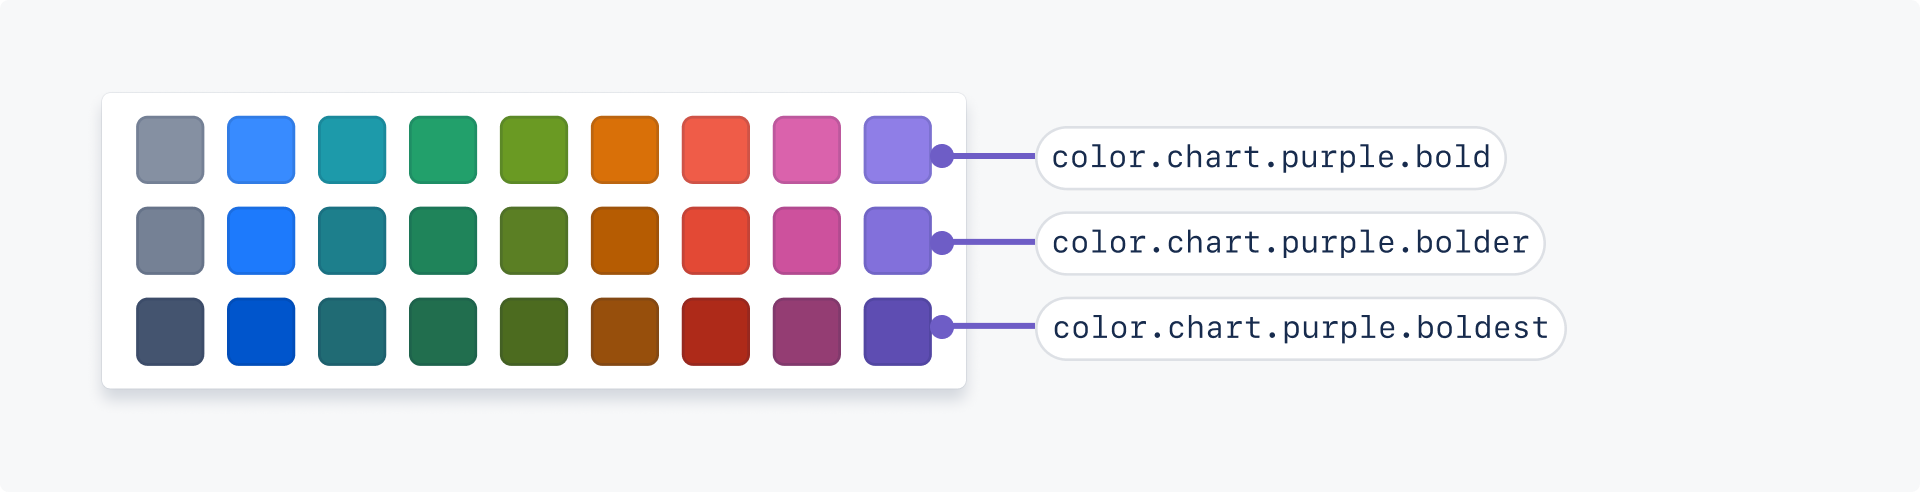 A chart color picker with three shades per color. There is a label pointing to each shade of purple. From most subtle to bold, the labels say color.chart.purple.bold, color.chart.purple.bolder, and color.chart.purple.boldest.